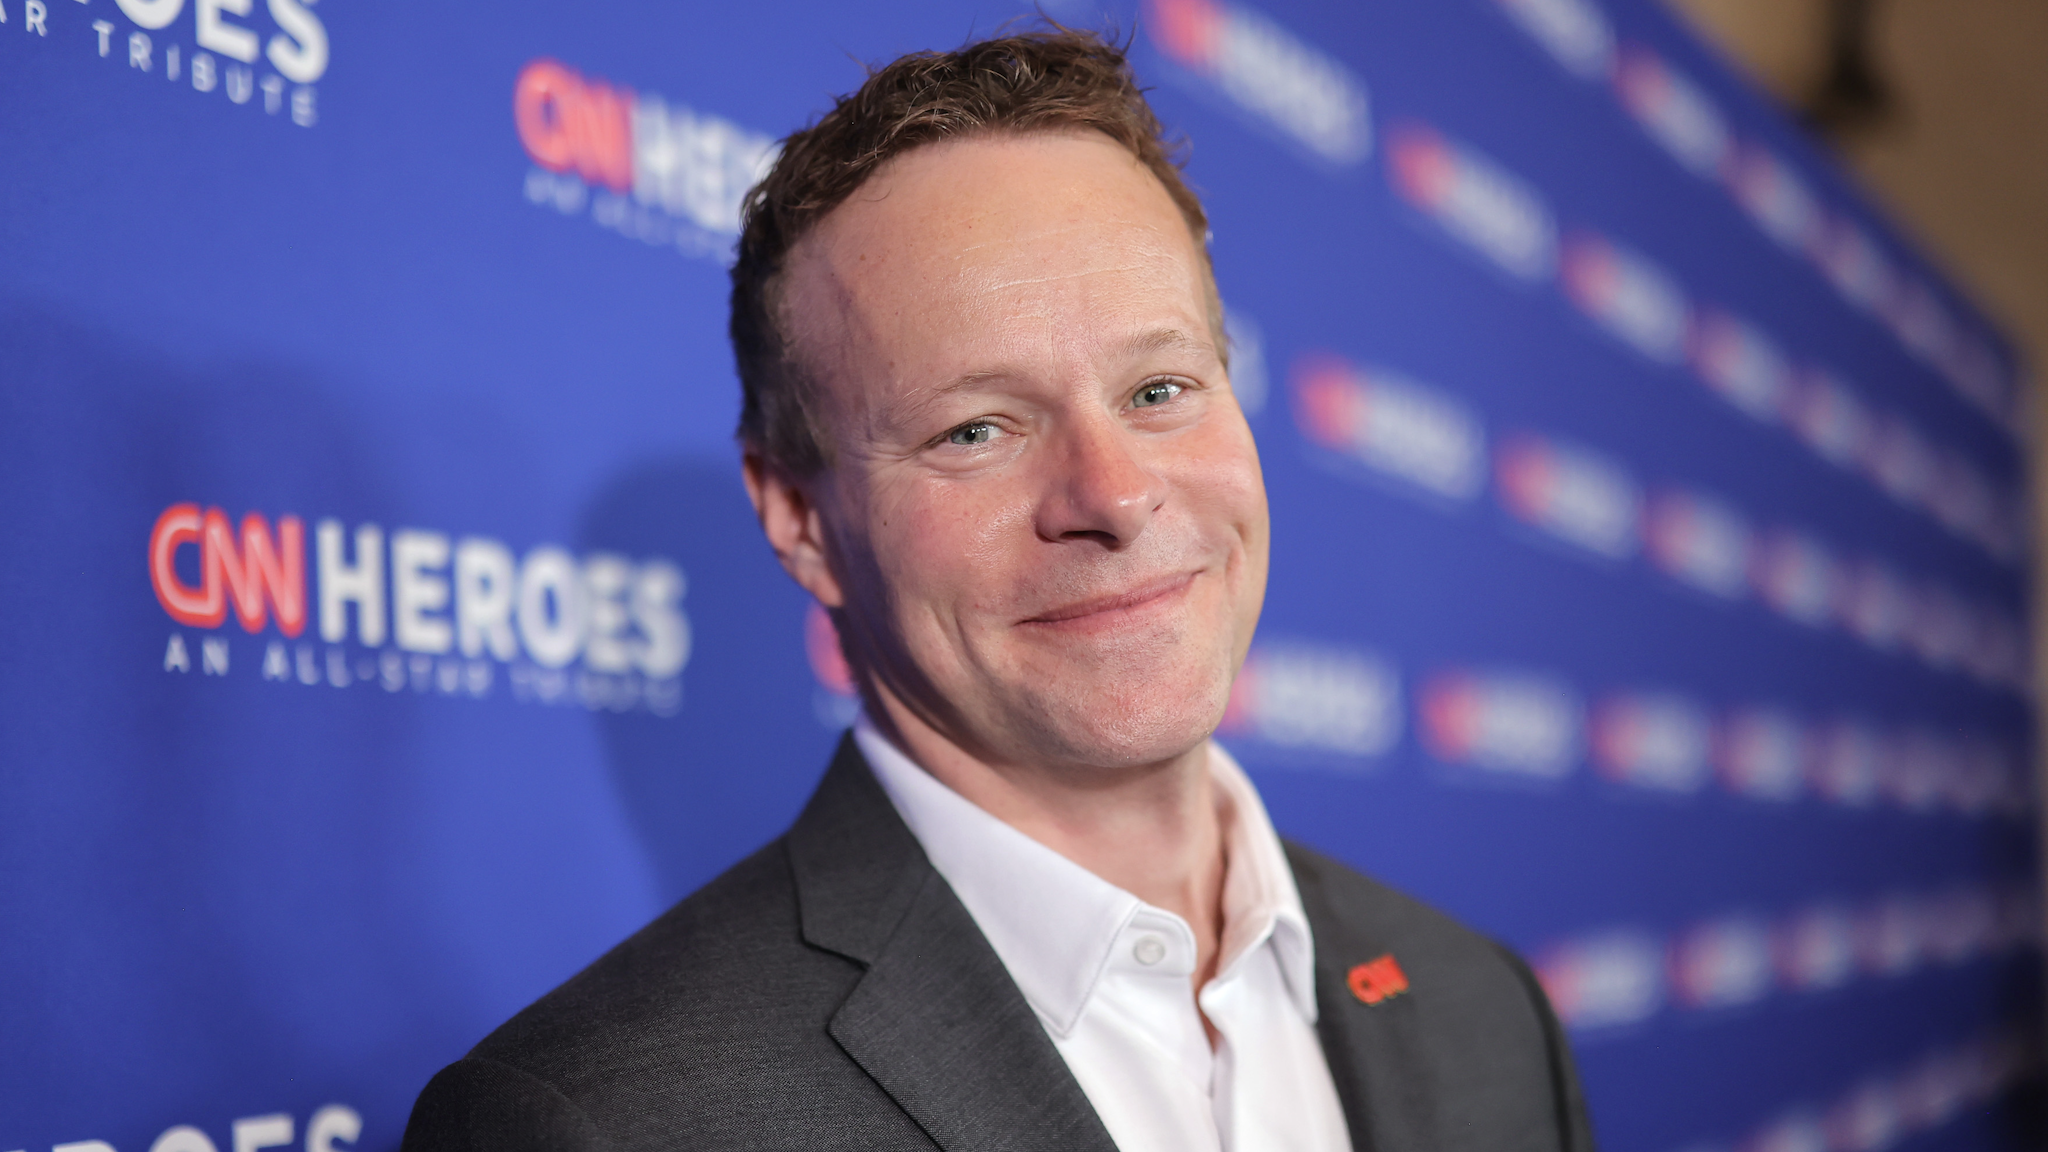 NEW YORK, NEW YORK - DECEMBER 11: Chris Licht, Chairman and Chief Executive Officer, CNN Worldwide attends the 16th annual CNN Heroes: An All-Star Tribute at the American Museum of Natural History on December 11, 2022 in New York City.